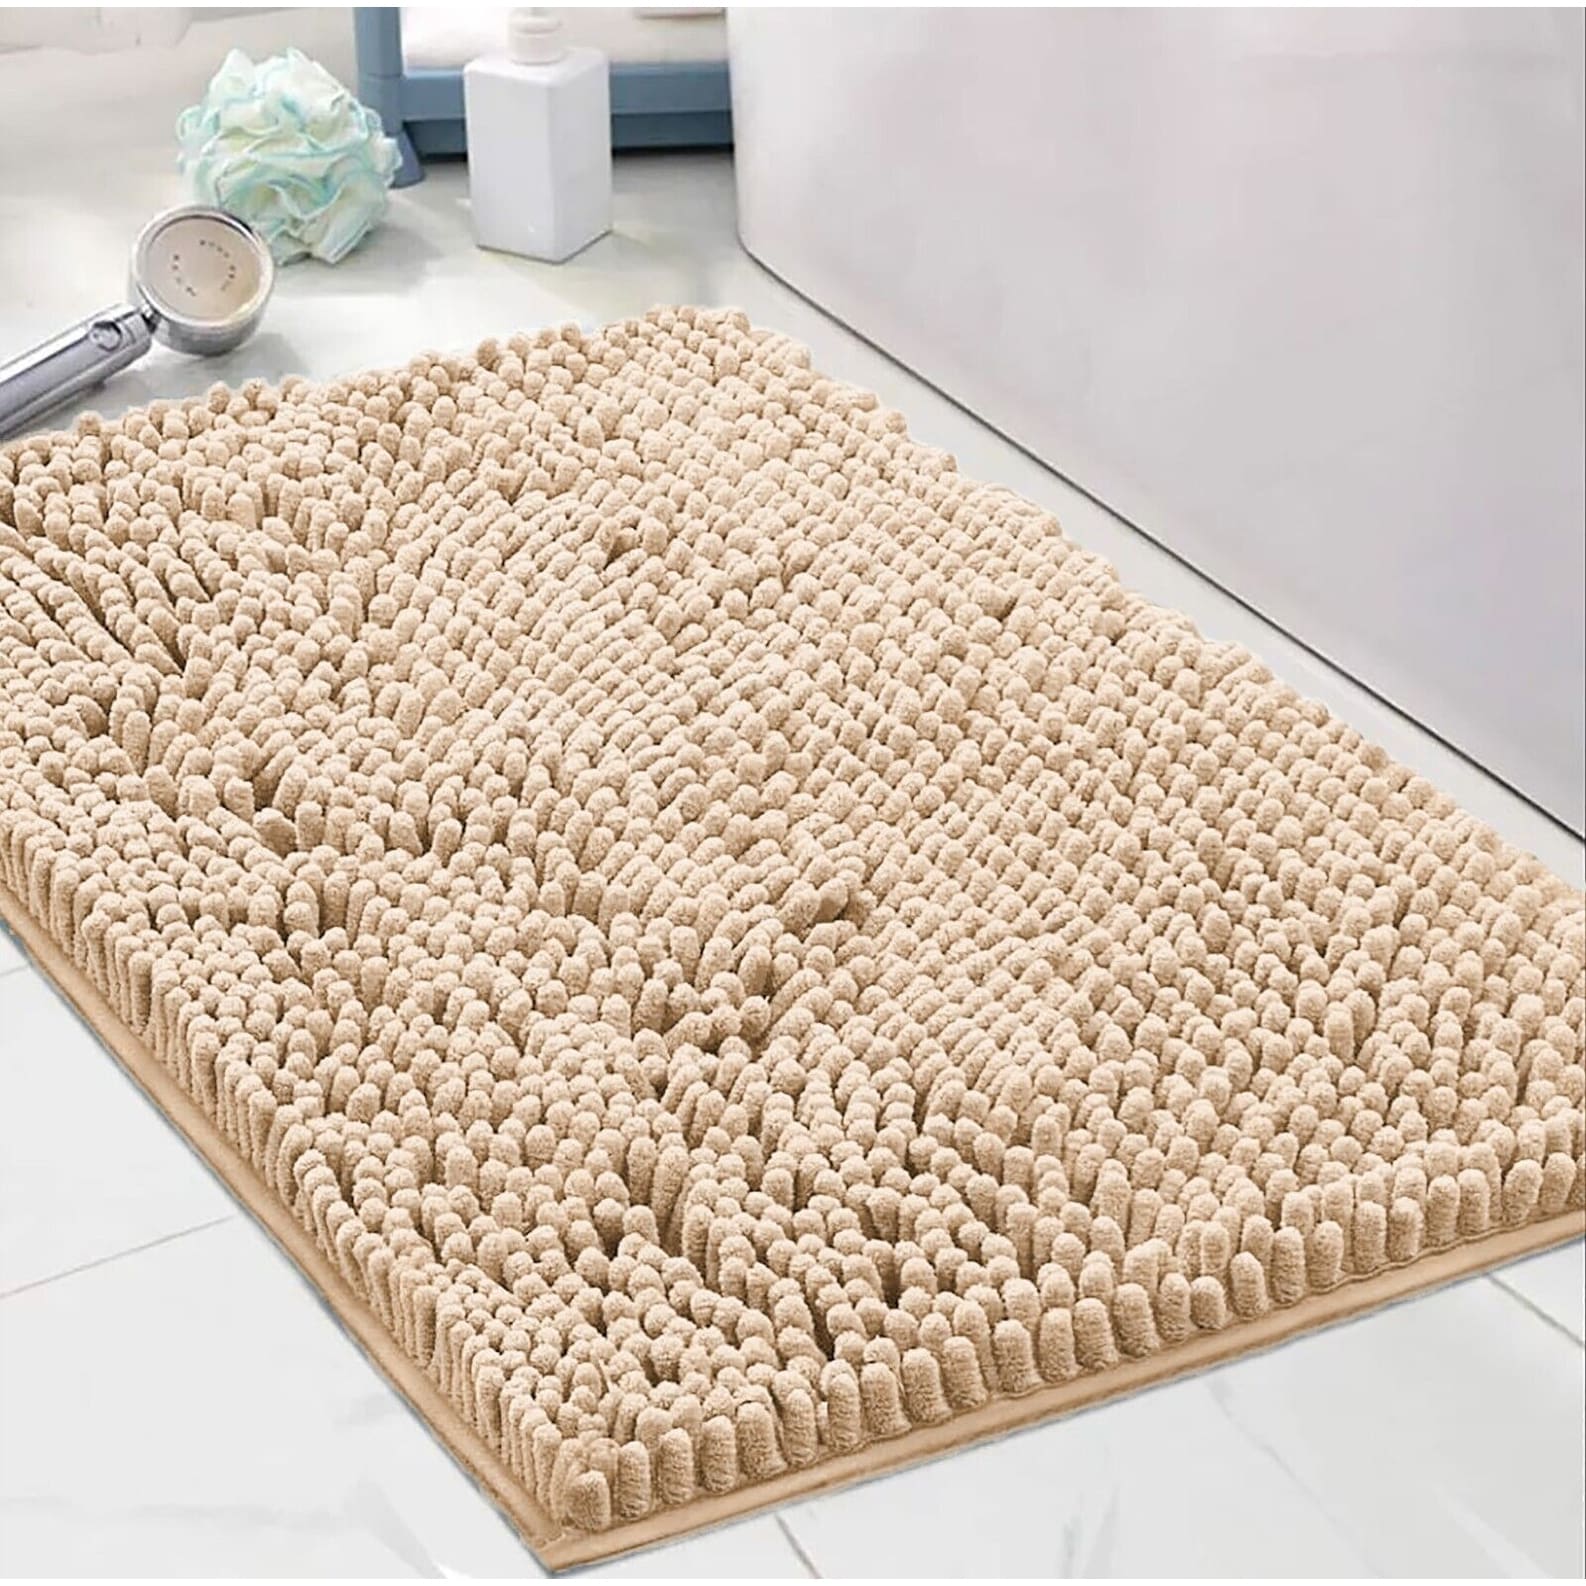 https://ak1.ostkcdn.com/images/products/is/images/direct/3b4007bb11cbcd78f268d0d2eae53be6704258a8/Soft-Cozy-Plush-Chenille-Bath-Mat-Highly-Absorbent-Shower-Mat-Non-Slip-Bathroom-Rug.jpg